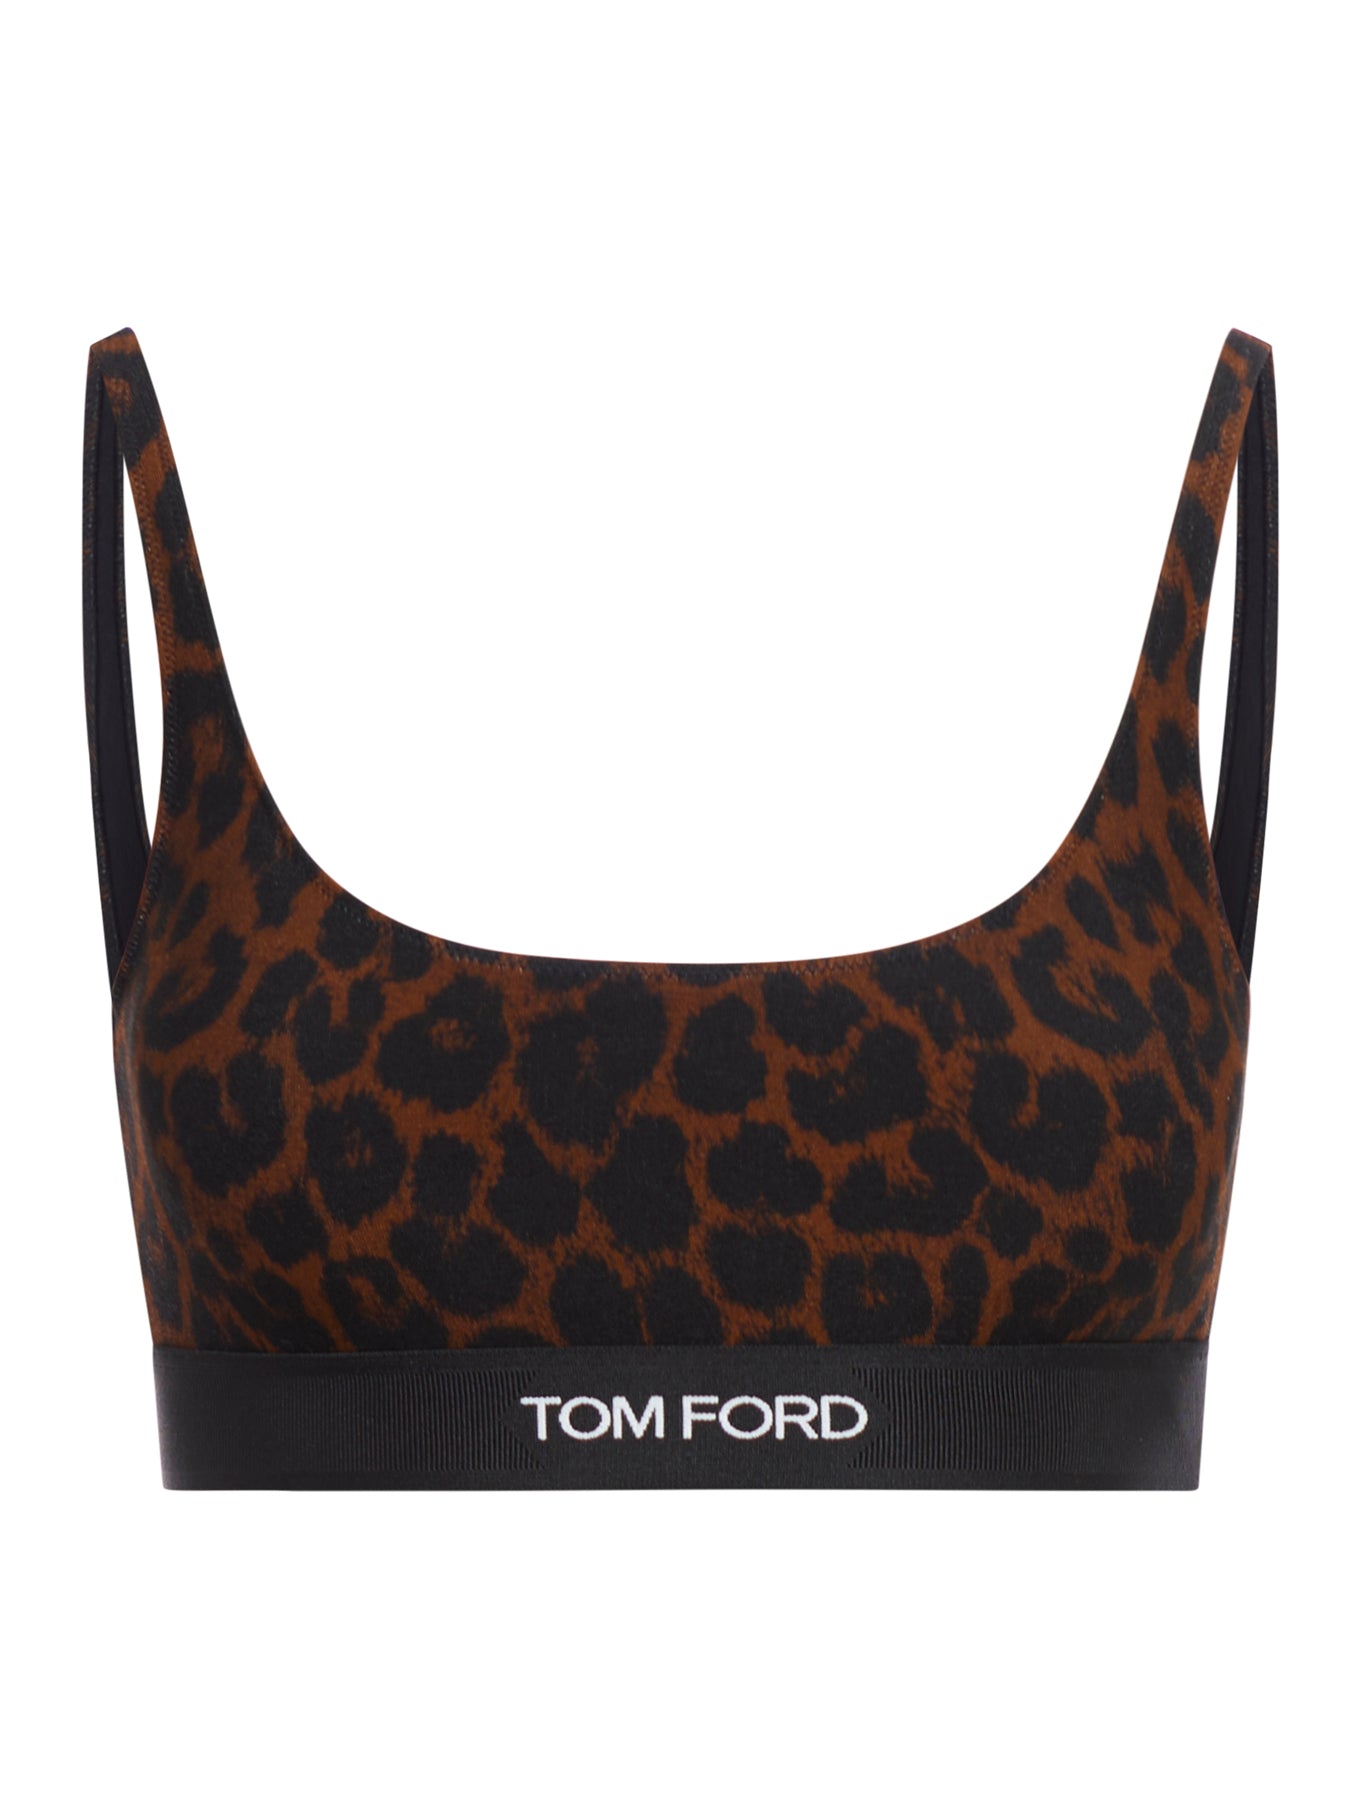 TOM FORD Signature Bralette in Chocolate Brown